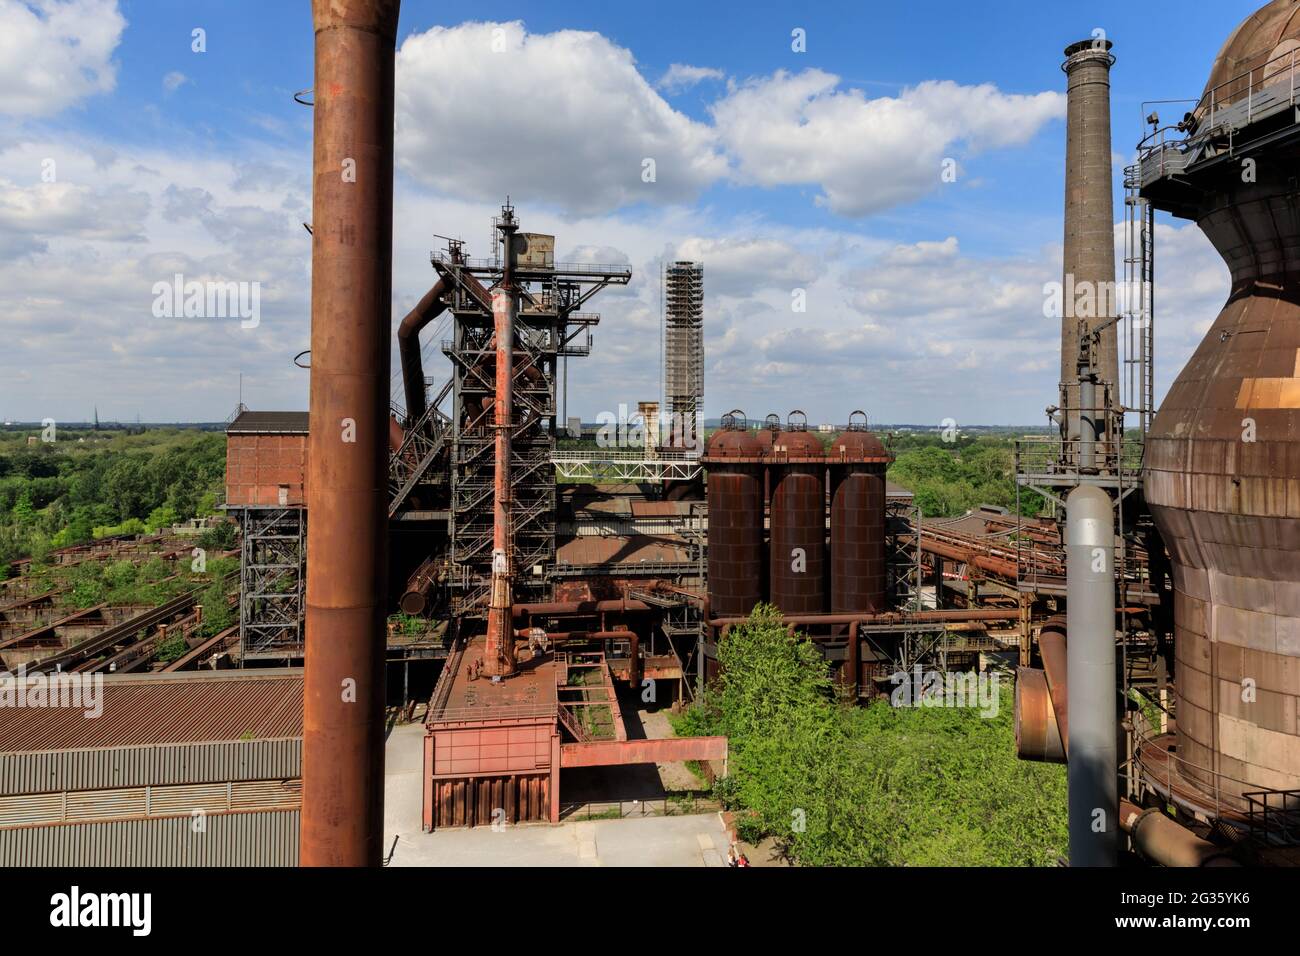 Industrial structures, Landschaftspark Duisburg-Nord, former ironworks and steel manufacturing, Duisburg, Ruhr, NRW, Germany Stock Photo